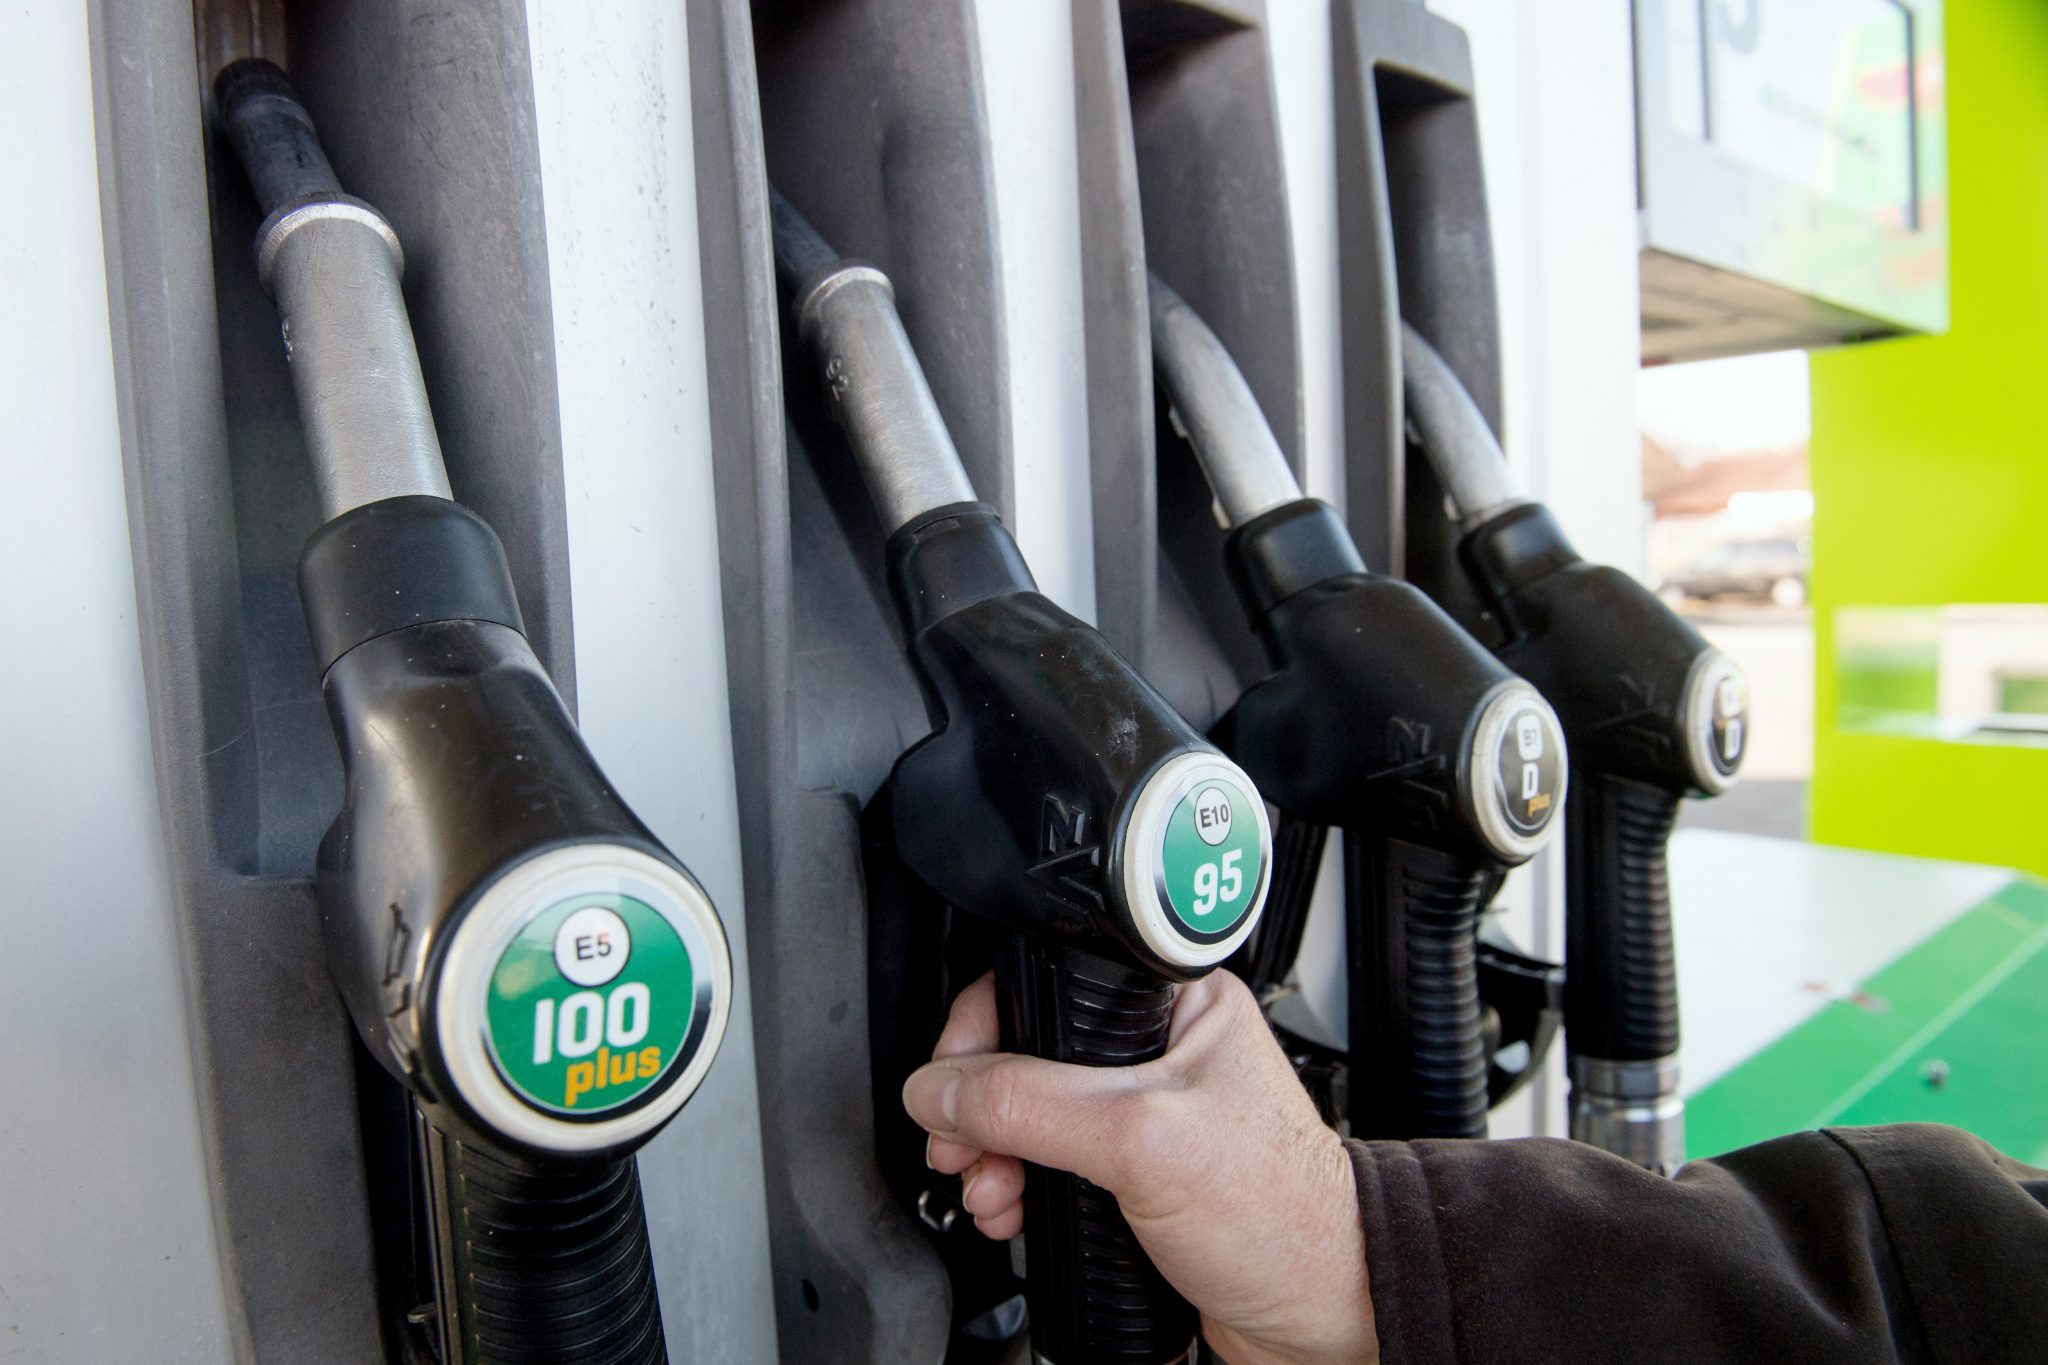 Fall in Hungarian Fuel Prices Announced